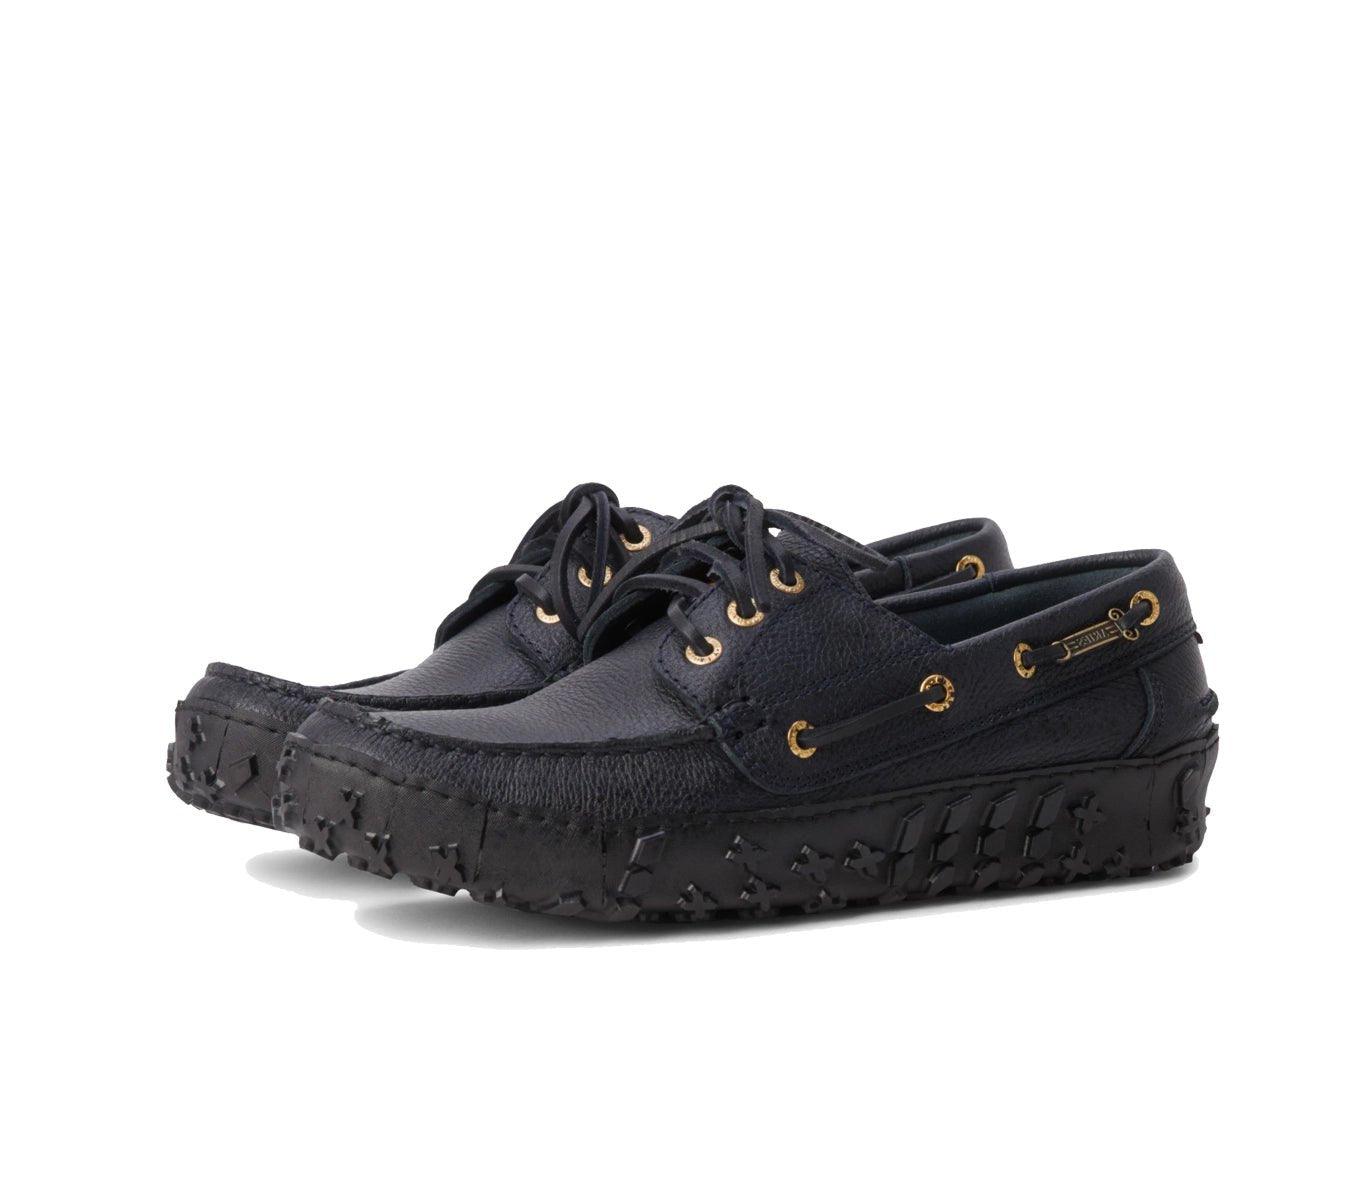 Tommy Jeans x ARIES Driver Shoe - Navy/Black - SUPERCONSCIOUS BERLIN